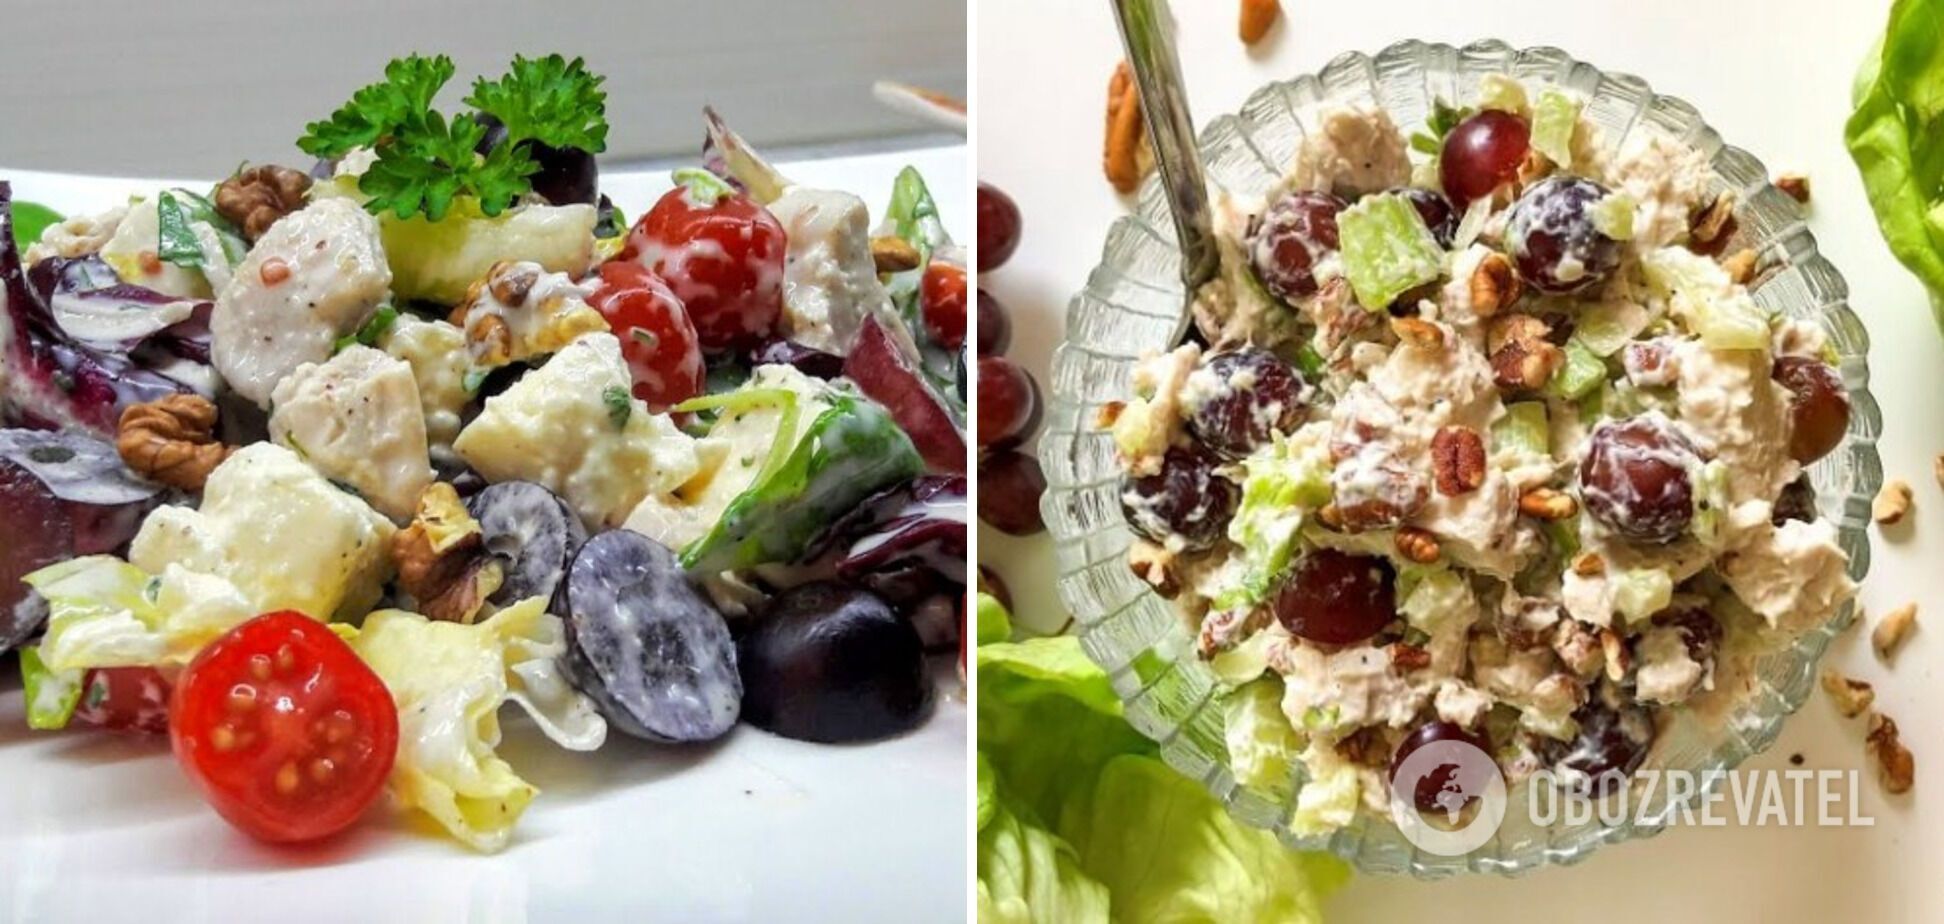 Salad with grapes, nuts and cheese